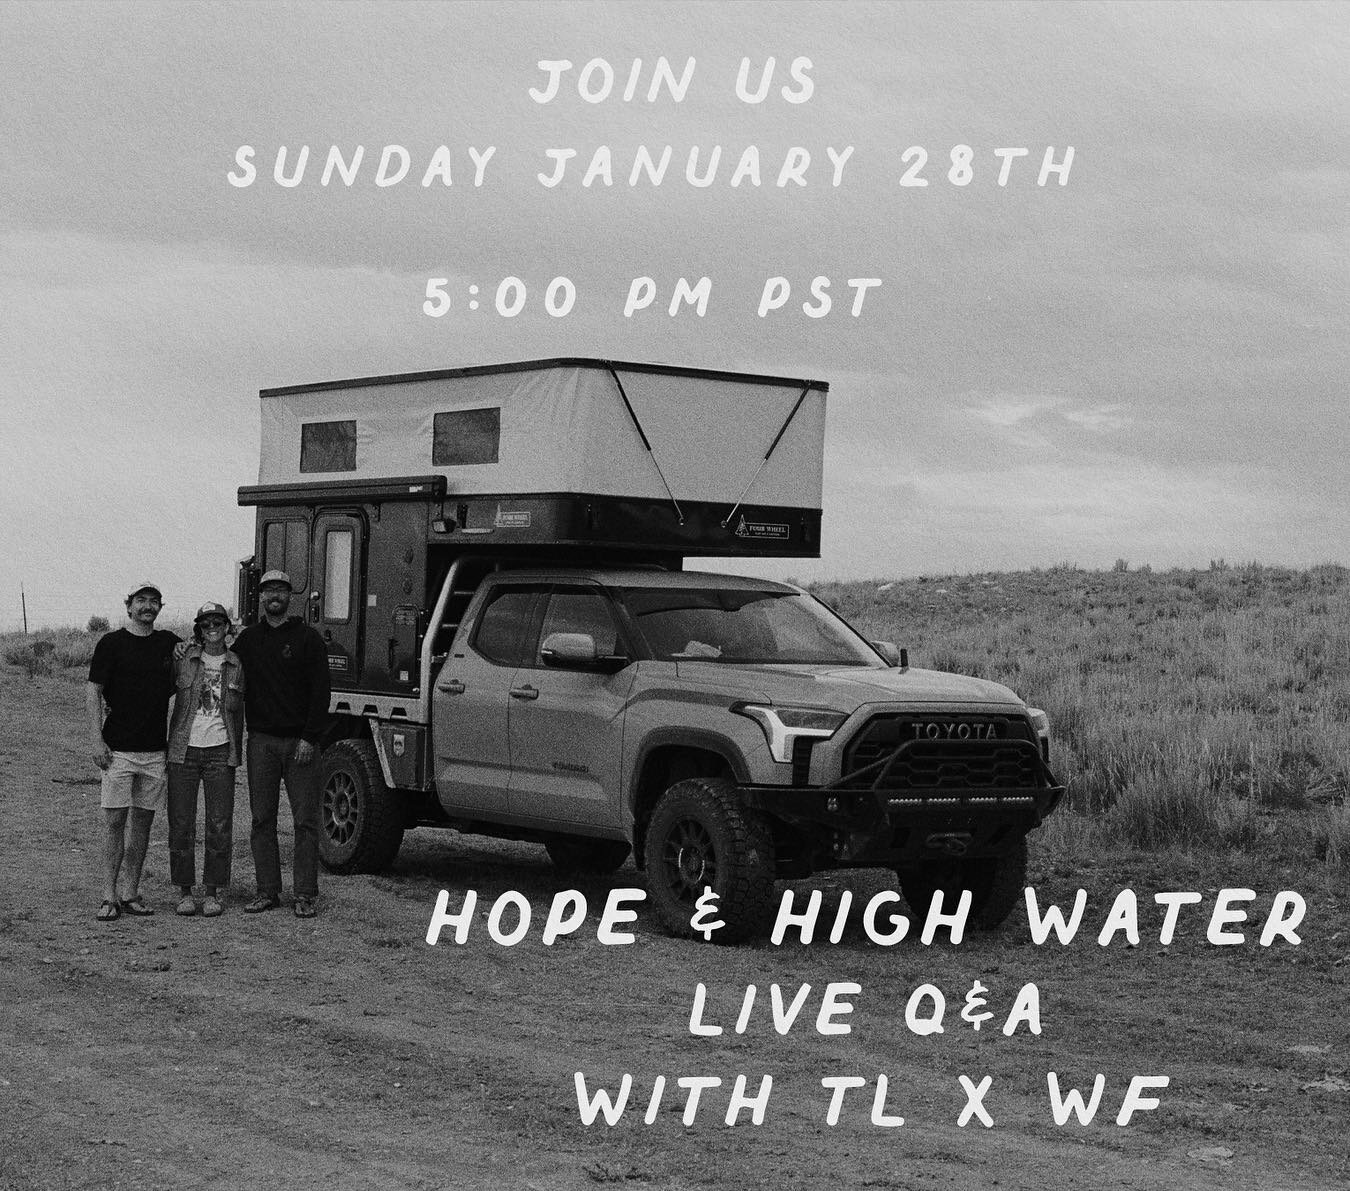 We&rsquo;re excited to announce that we&rsquo;ll be doing a live Q+A with Scottie of @wildflyproductions about our collab film &ldquo;Hope &amp; High Water&rdquo; on Sunday, January 28th on the Wild Fly YouTube channel. 

Got questions about the film